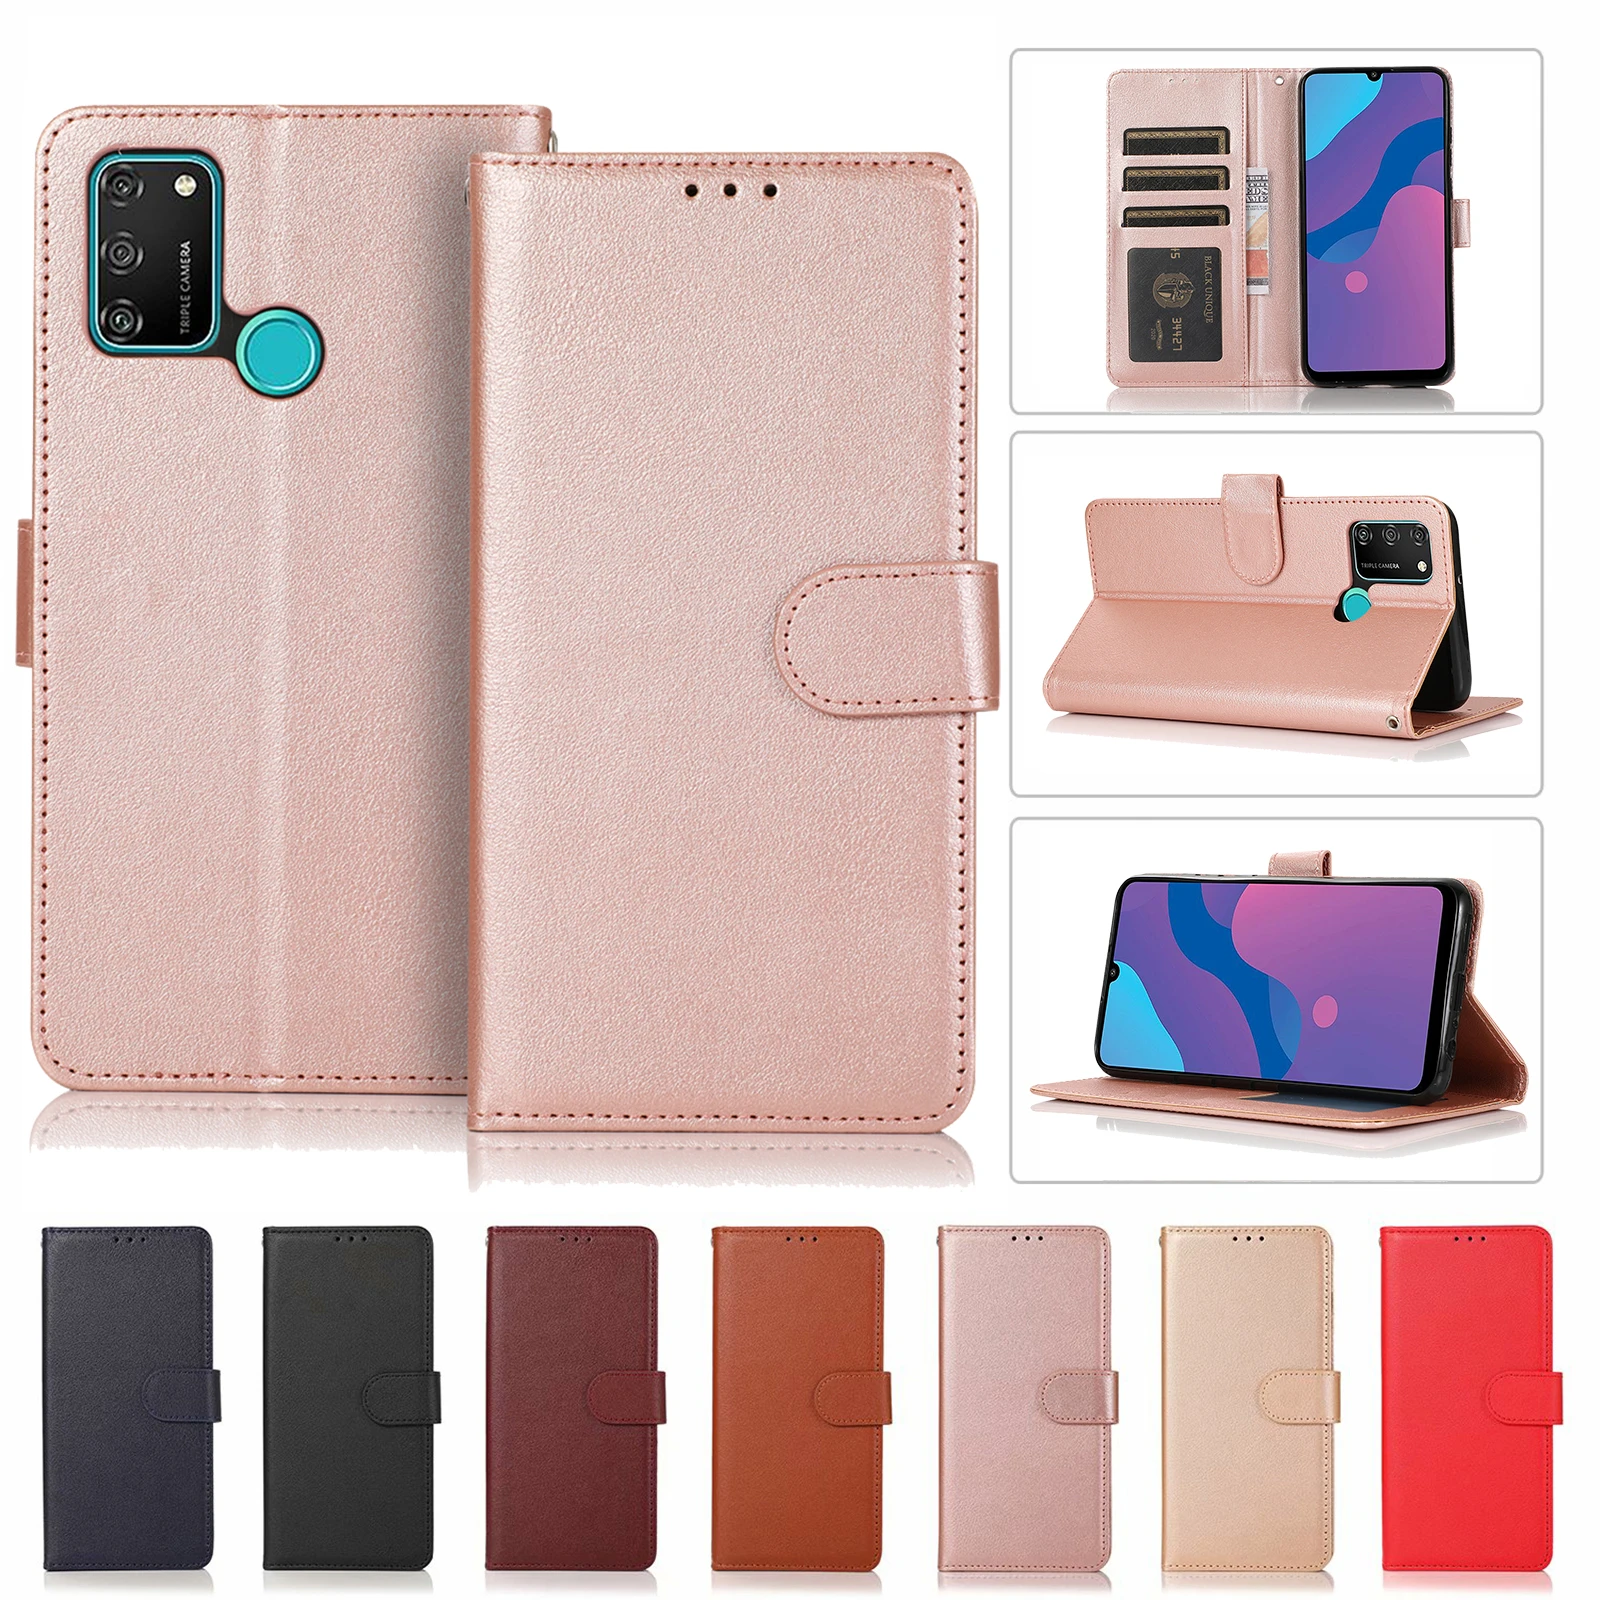 

Leather Case for Huawei P30 P40 P20 Pro P10 P9 P8 P Smart Y7 Y6 Y5 2019 2018 Y5P Y6P Y7P Y8P Flip Wallet Funda Protective Cover